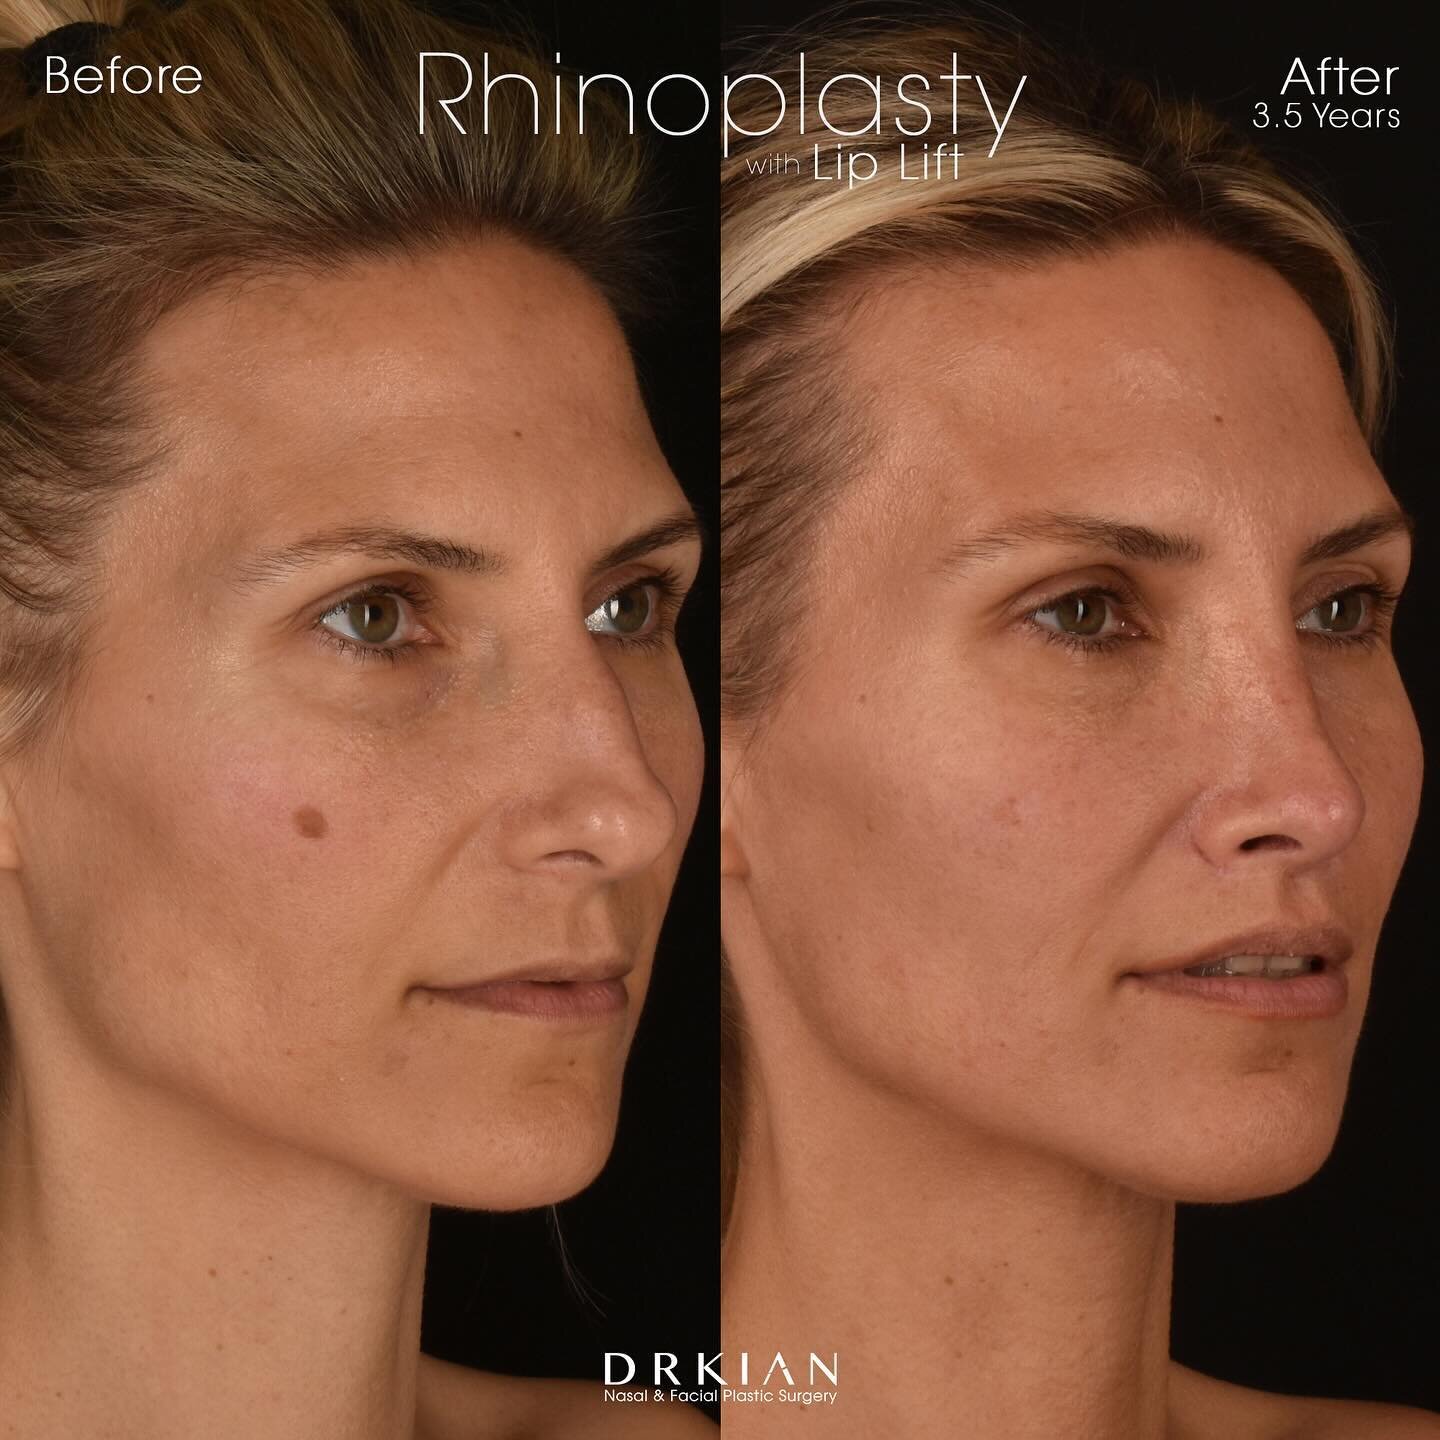 𝐏𝐫𝐨𝐜𝐞𝐝𝐮𝐫𝐞: Rhinoplasty with Bulbous Tip Refinement and Lip Lift
𝐑𝐞𝐬𝐮𝐥𝐭𝐬: Before &amp; Three &amp; a Half Years After
𝐒𝐮𝐫𝐠𝐞𝐨𝐧&rsquo;𝐬 𝐍𝐨𝐭𝐞: After experiencing trauma to her nose twice earlier in her life, Karen decided to p